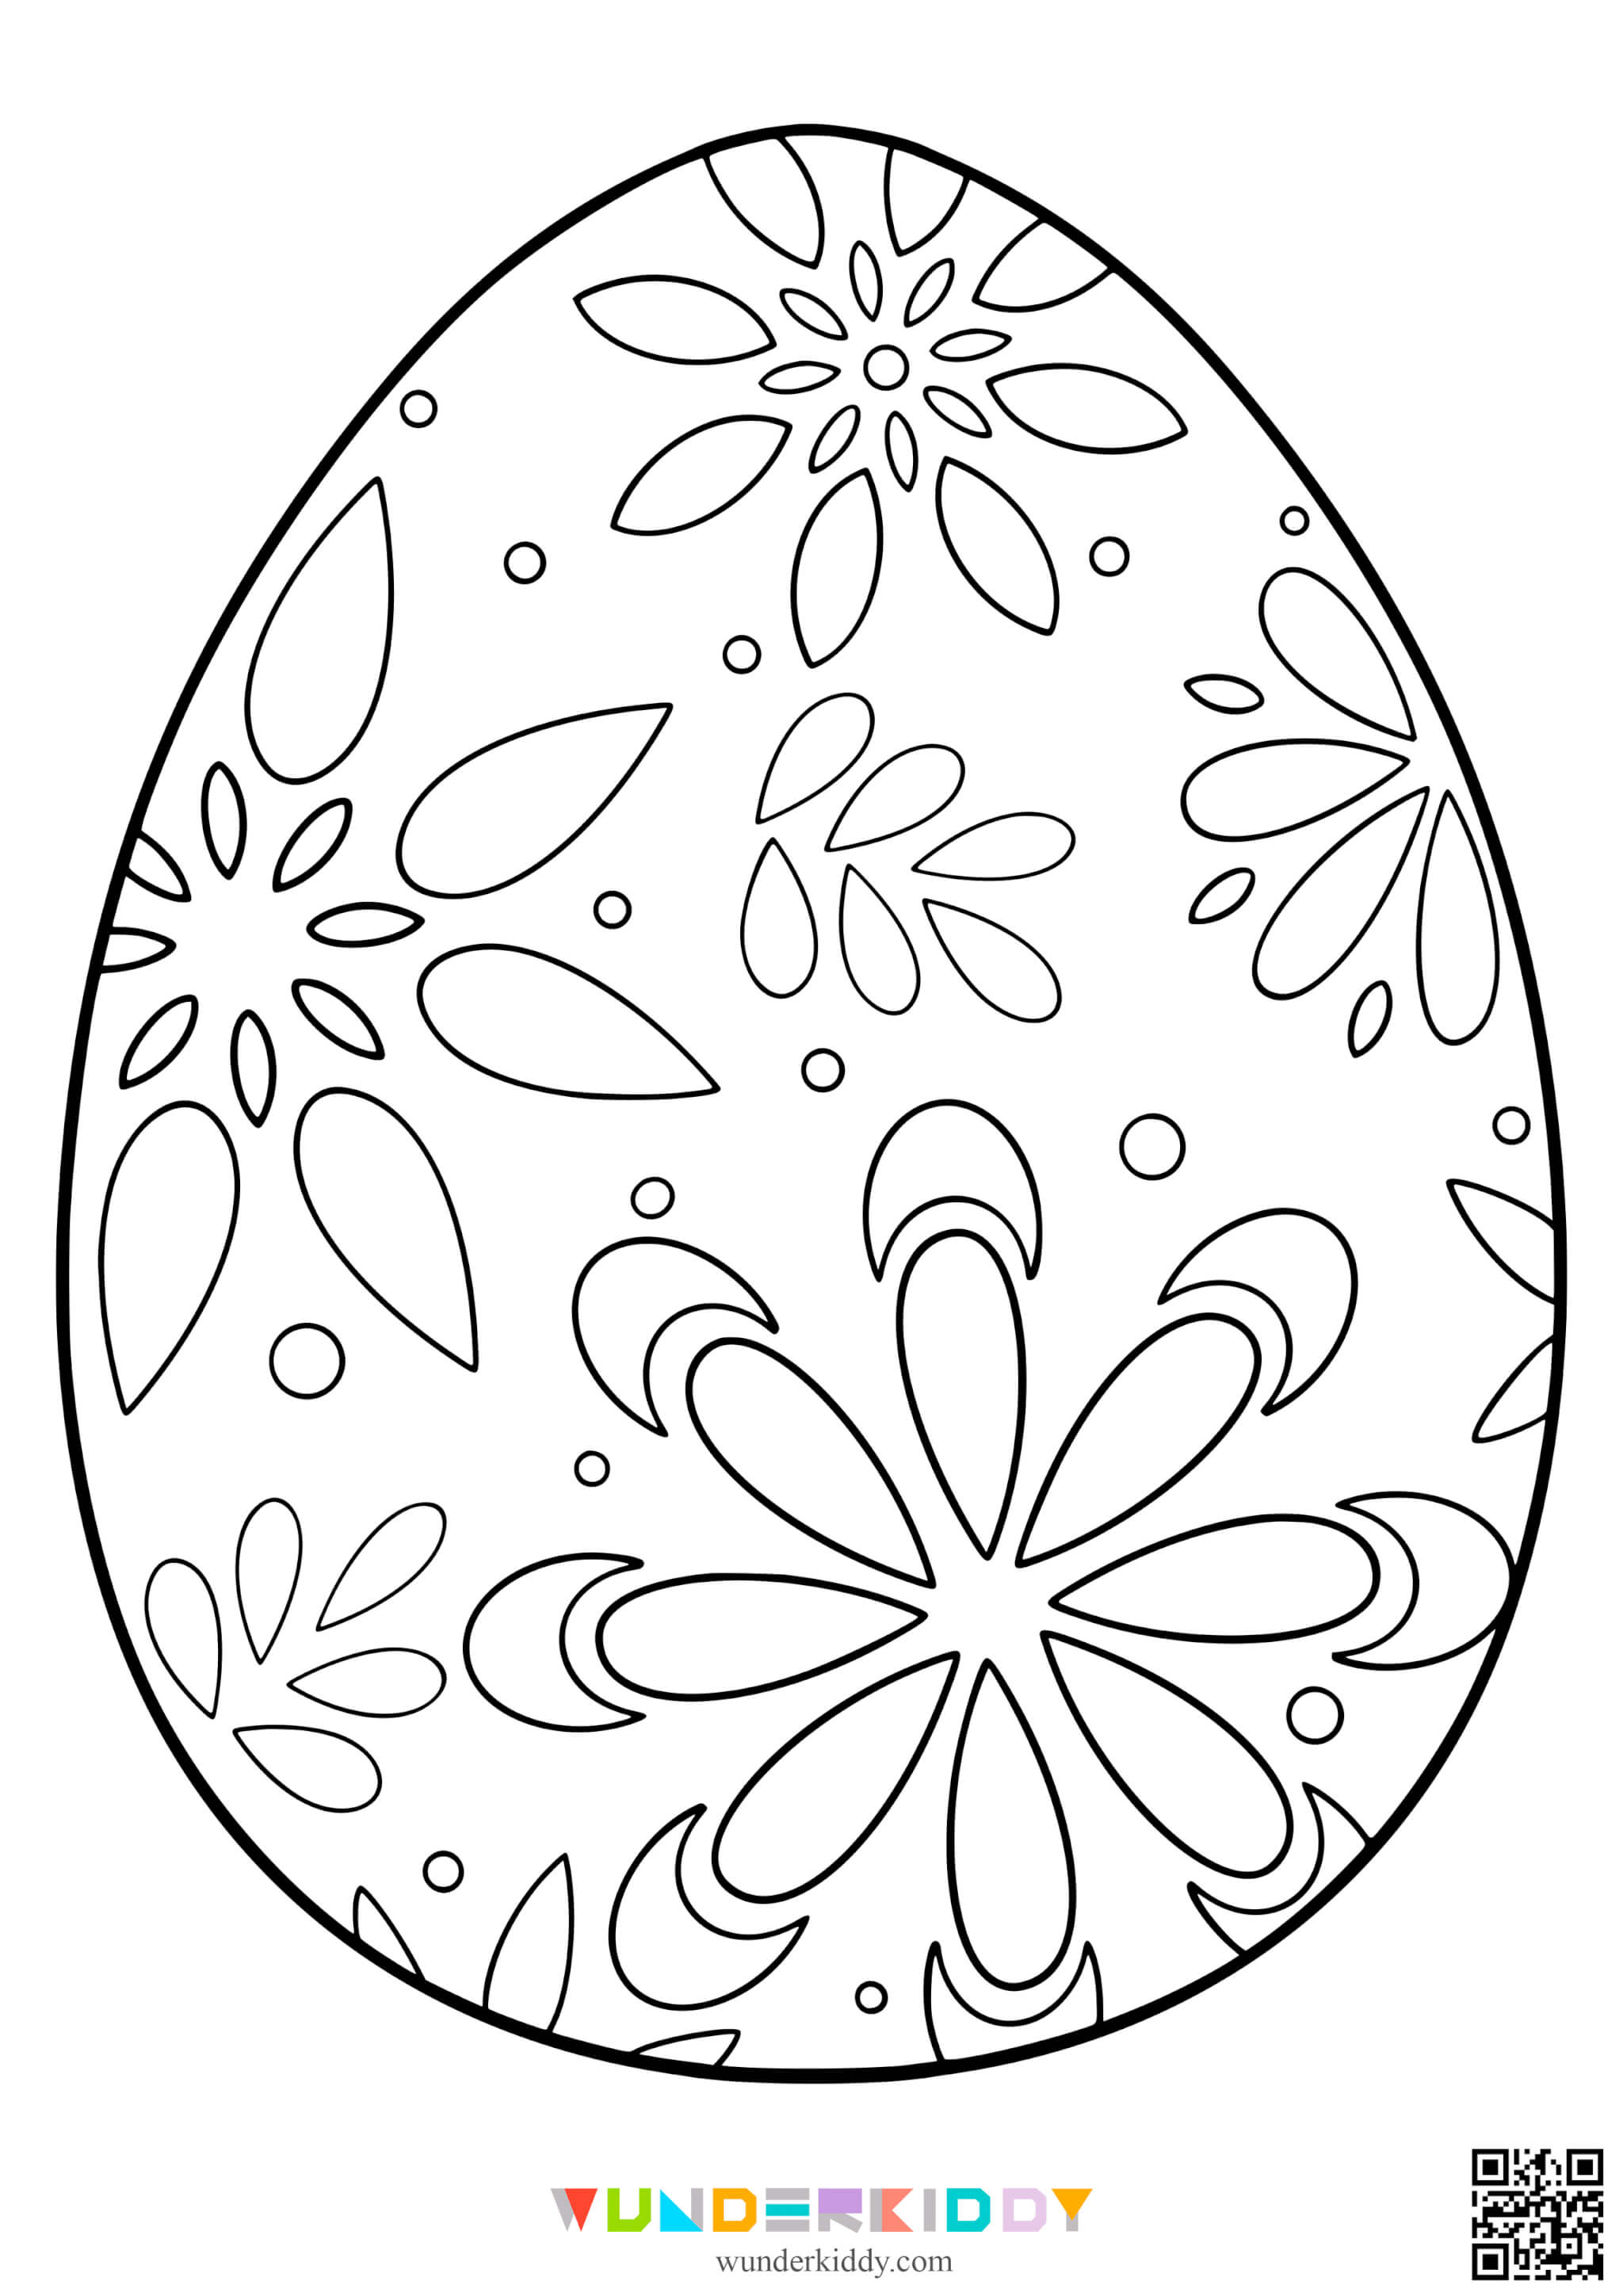 Easter Egg Template Colouring Page - Image 3